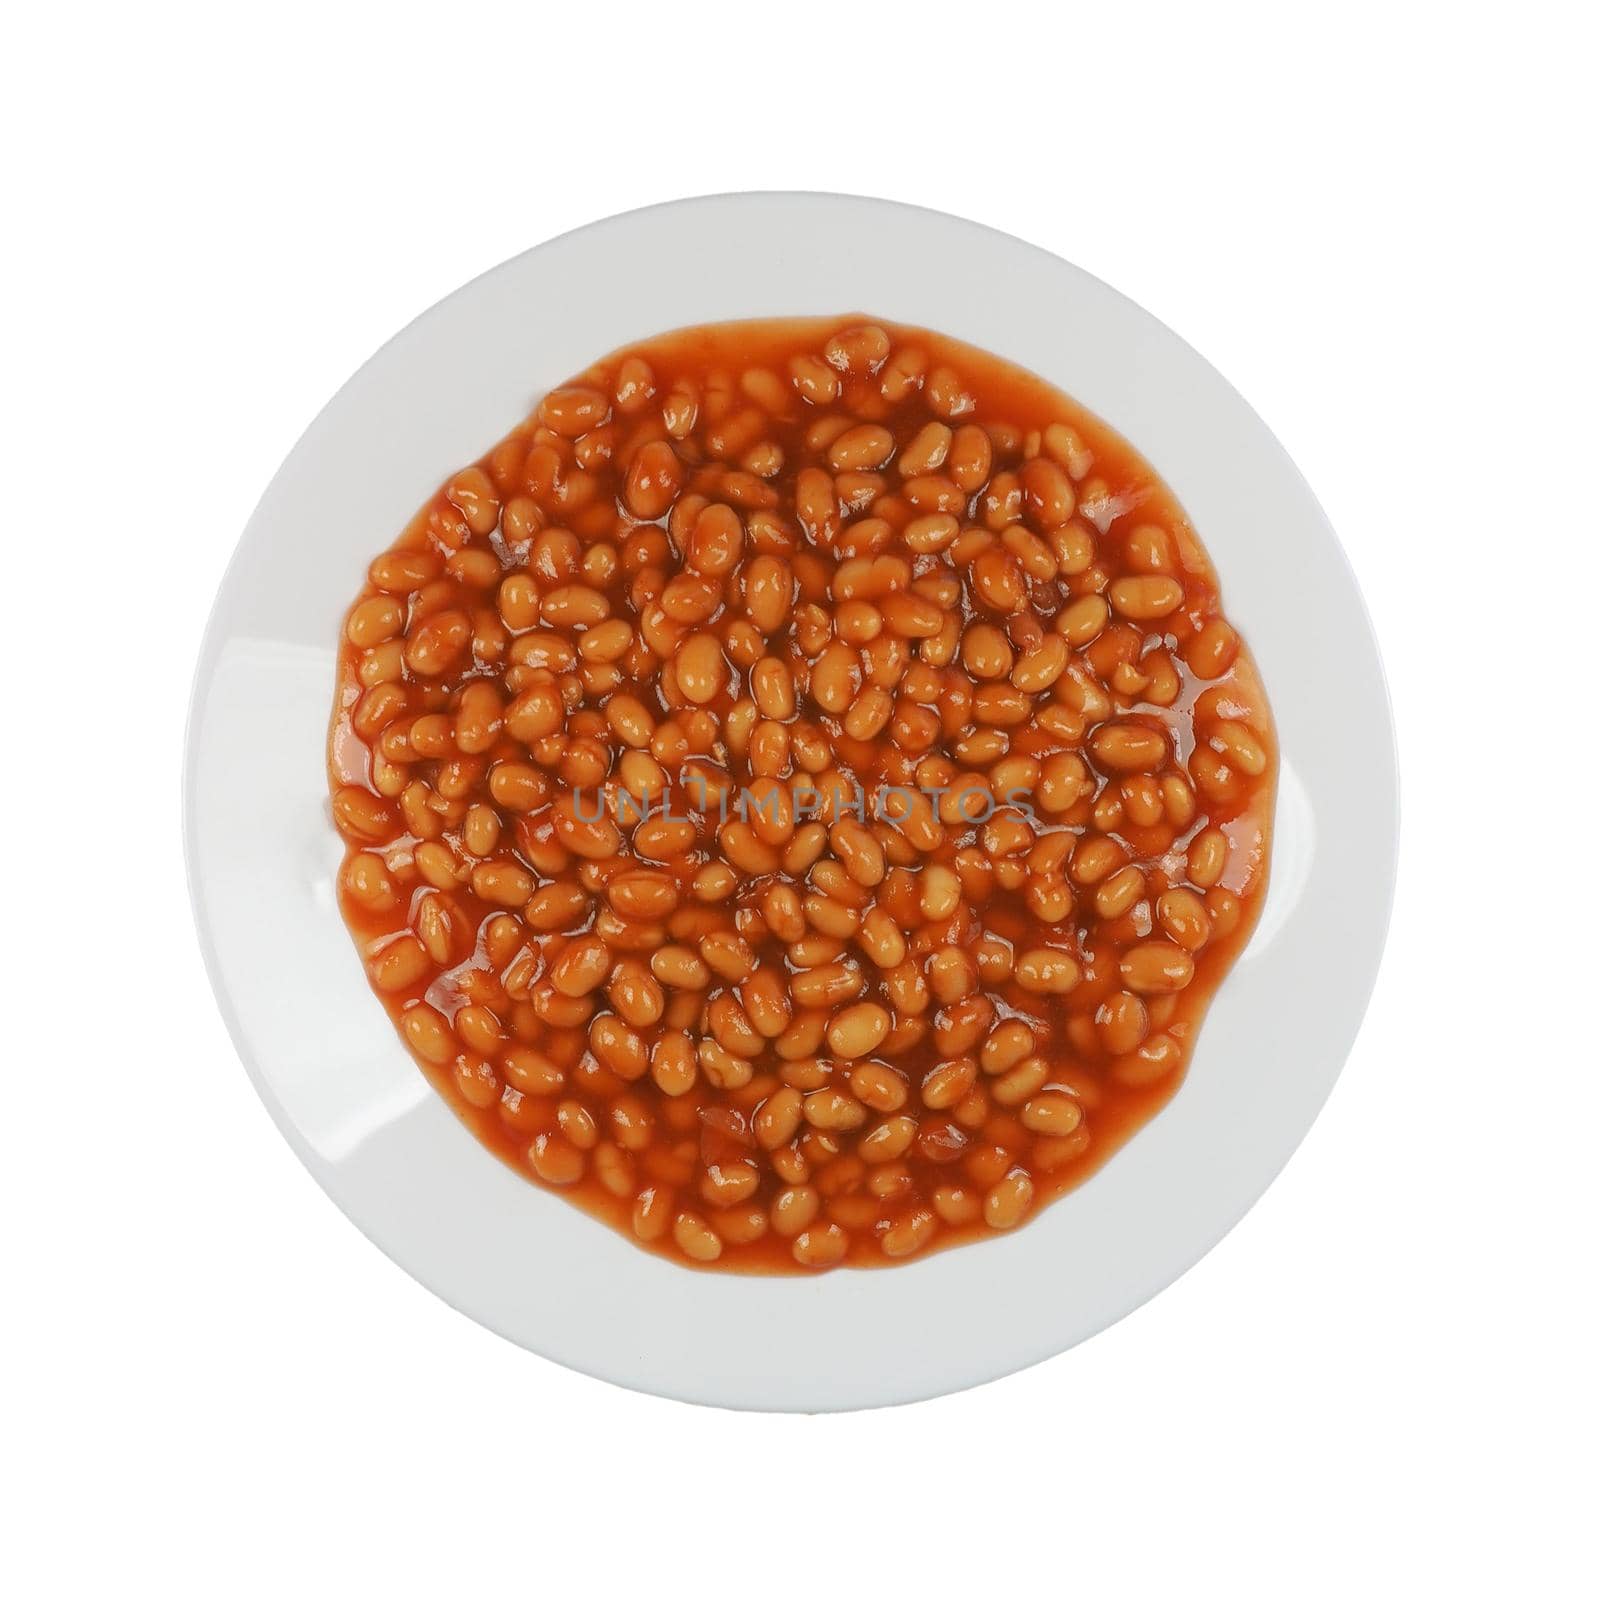 baked beans with tomato soup isolated over white background